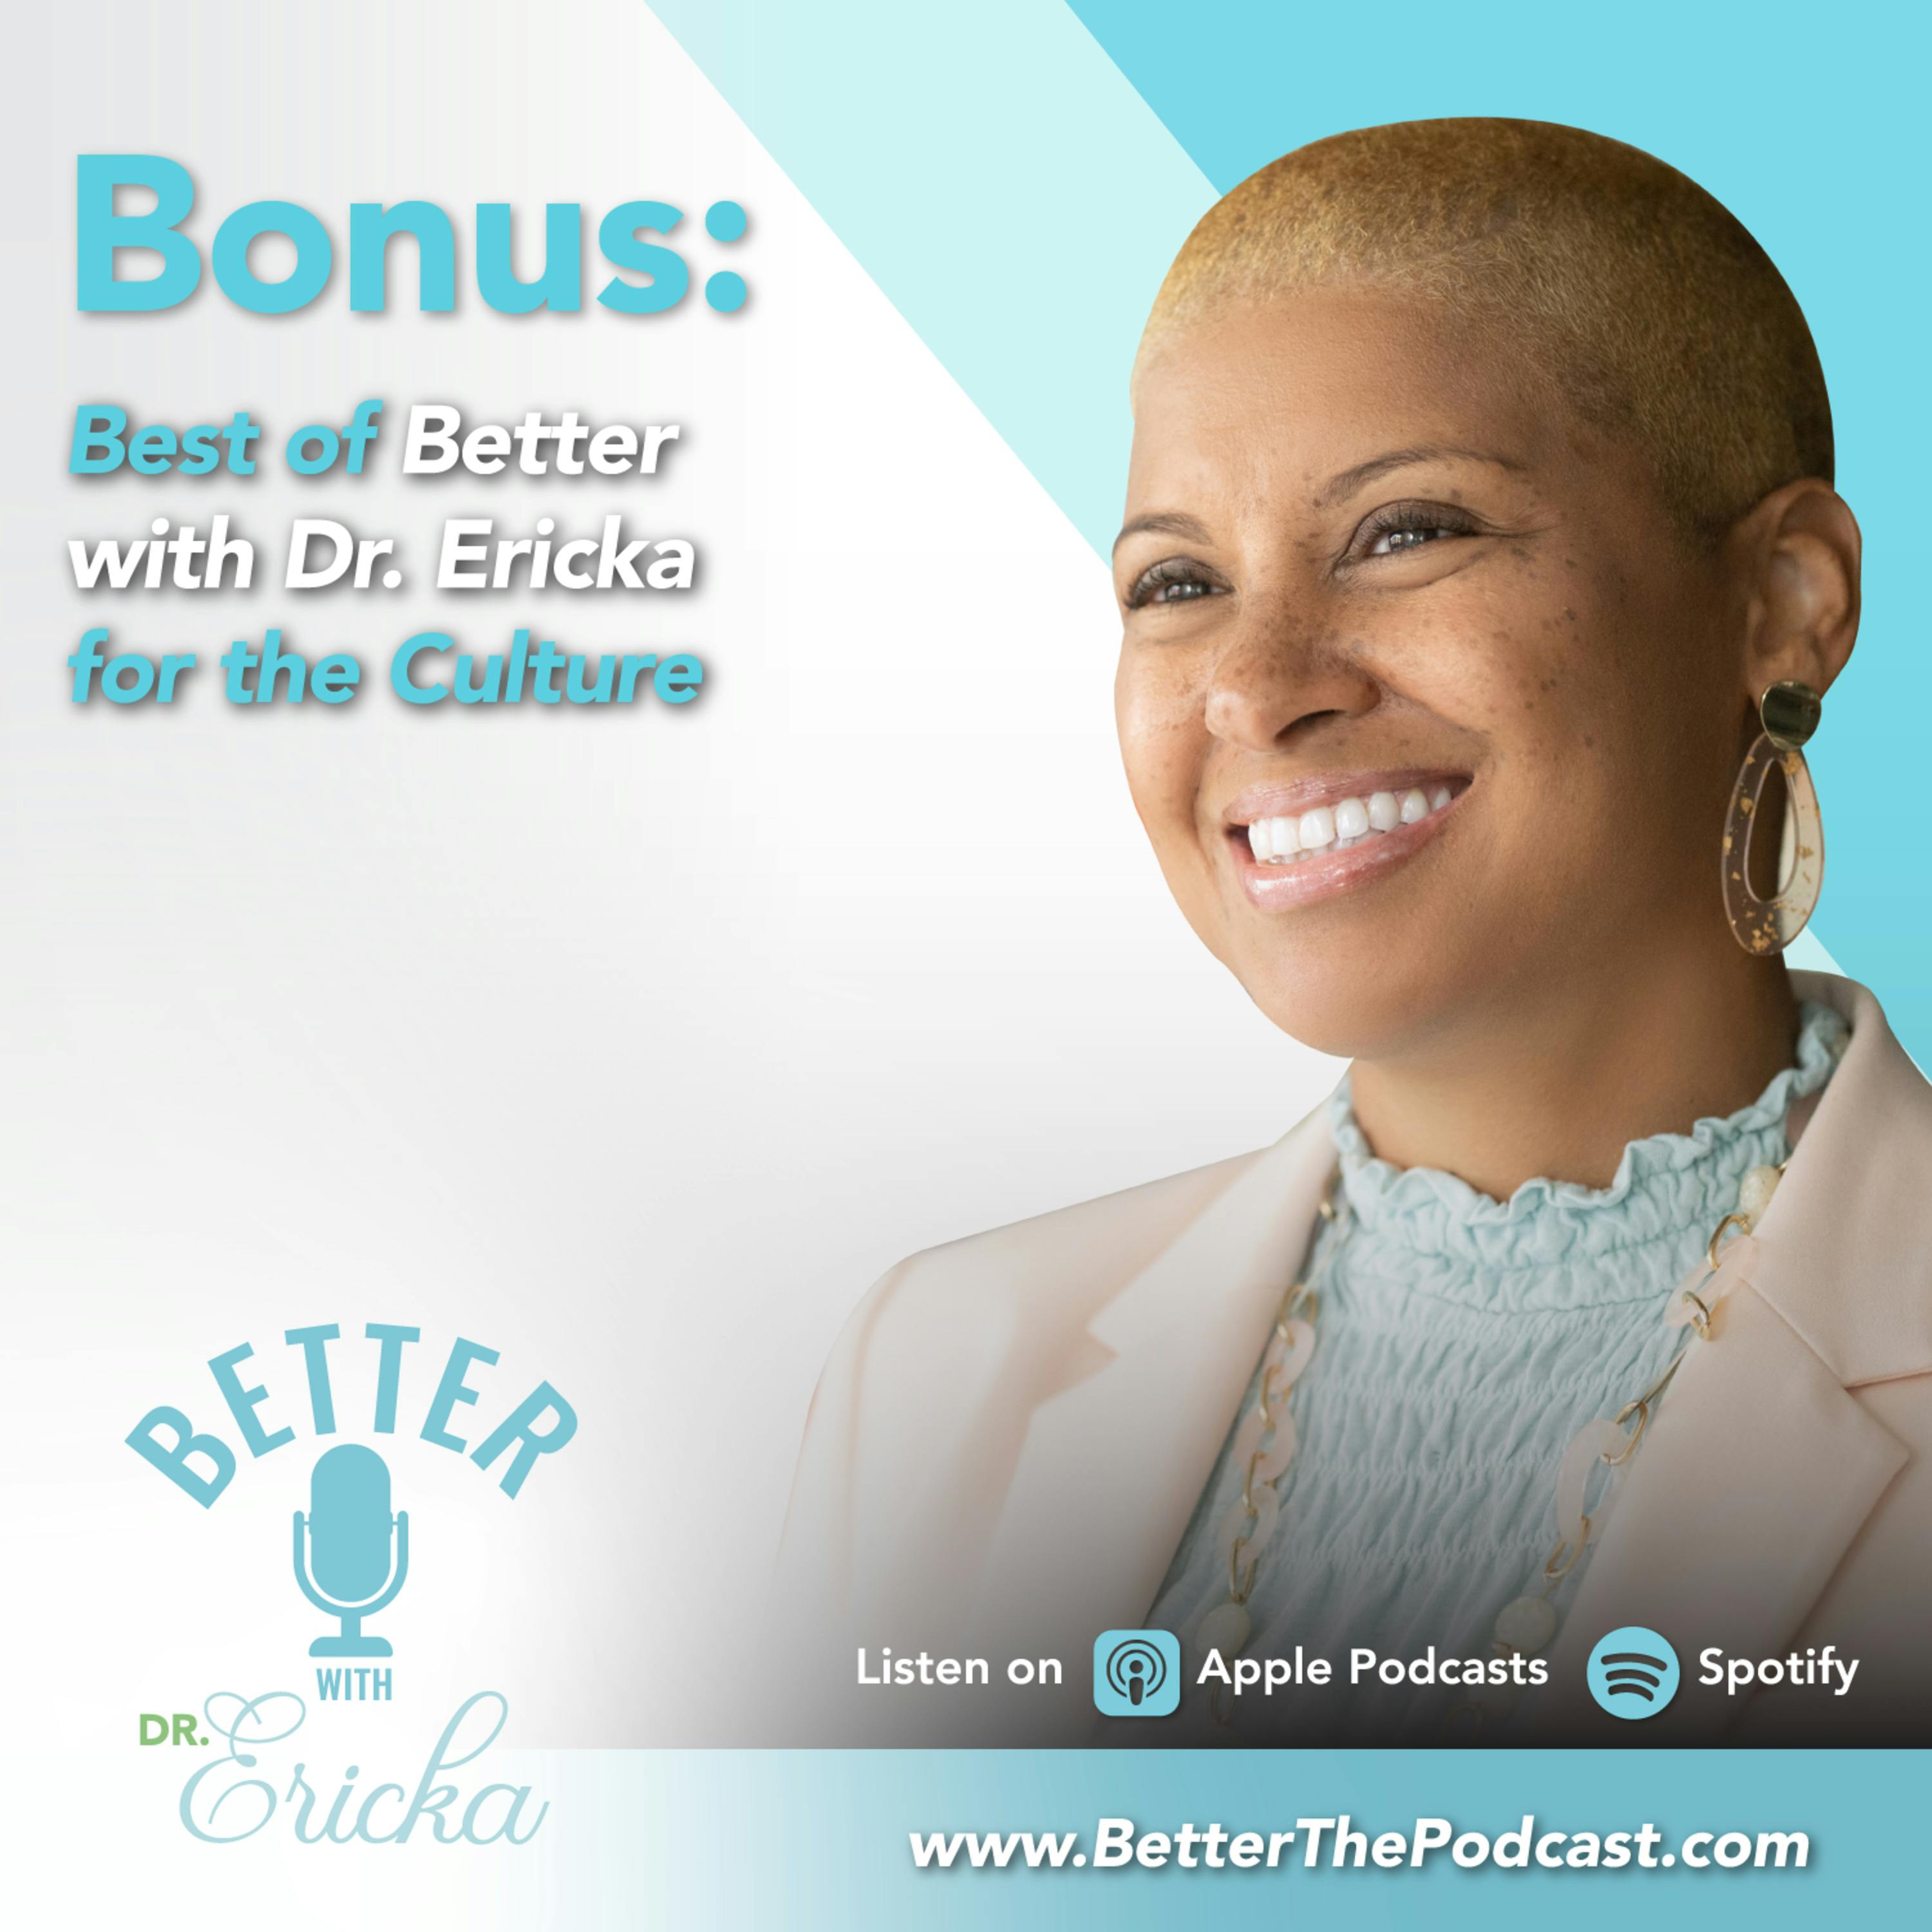 Best of Better with Dr. Ericka for the Culture